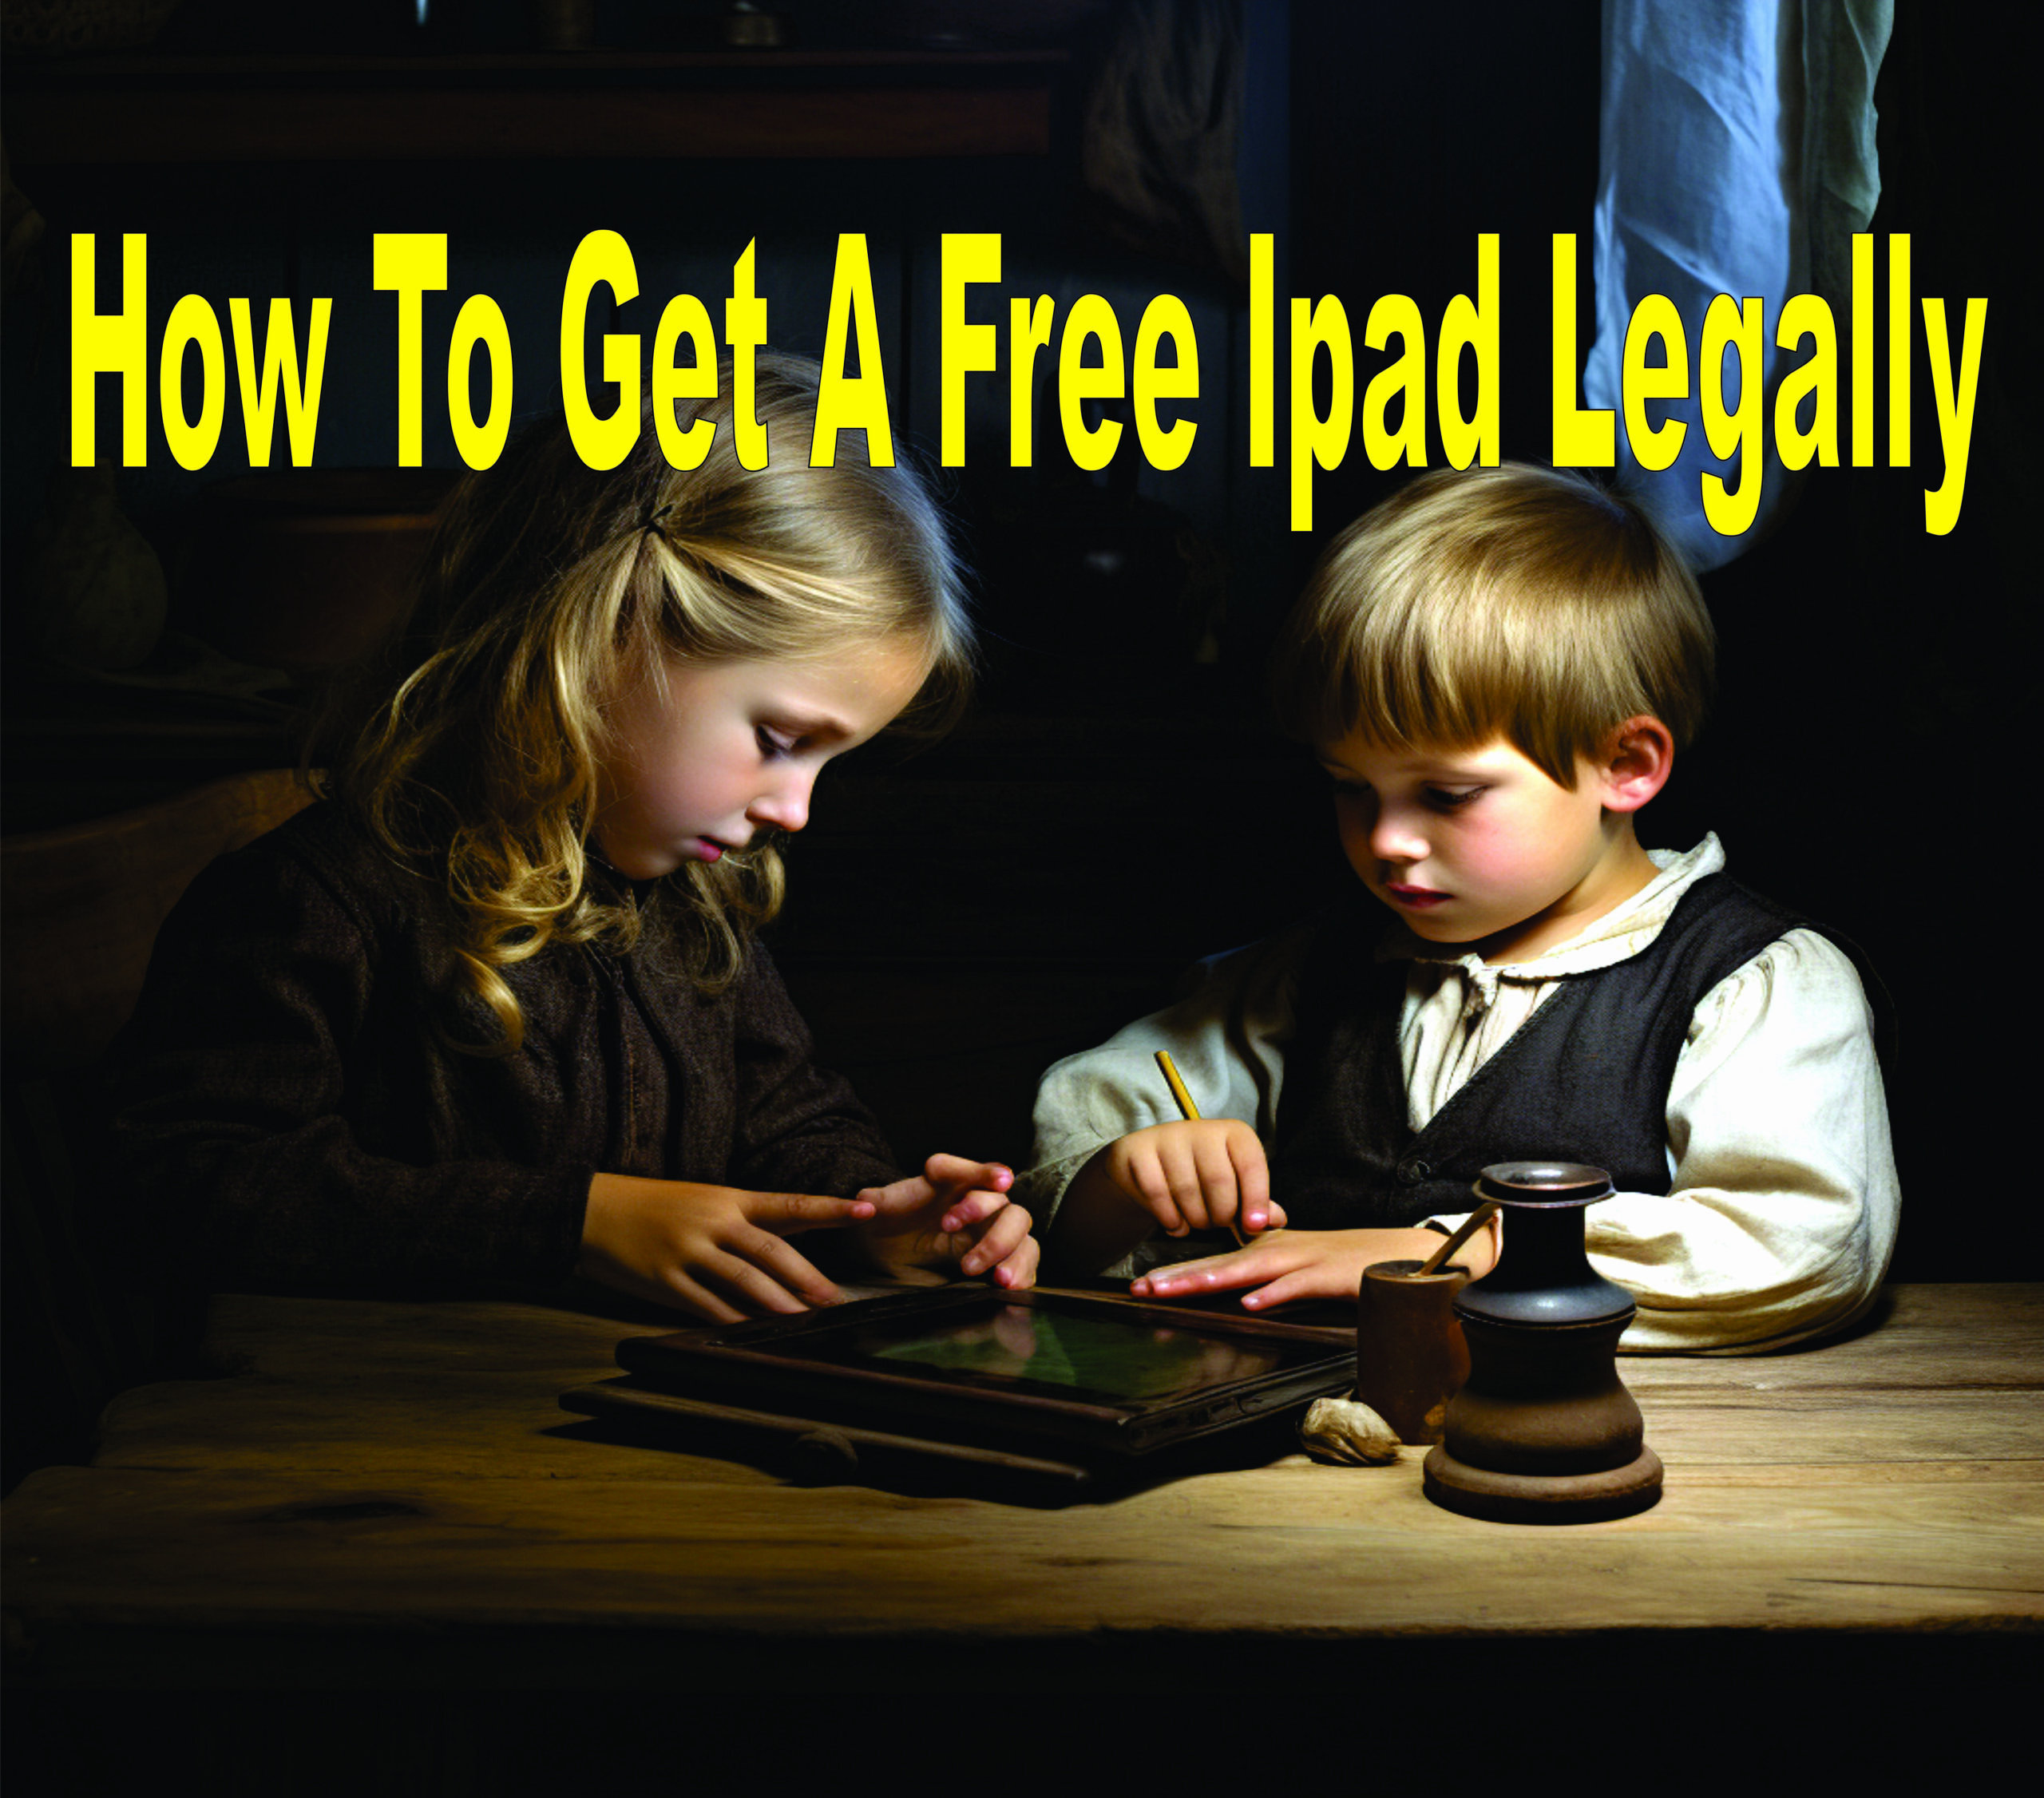 How To Get A Free Ipad Legally